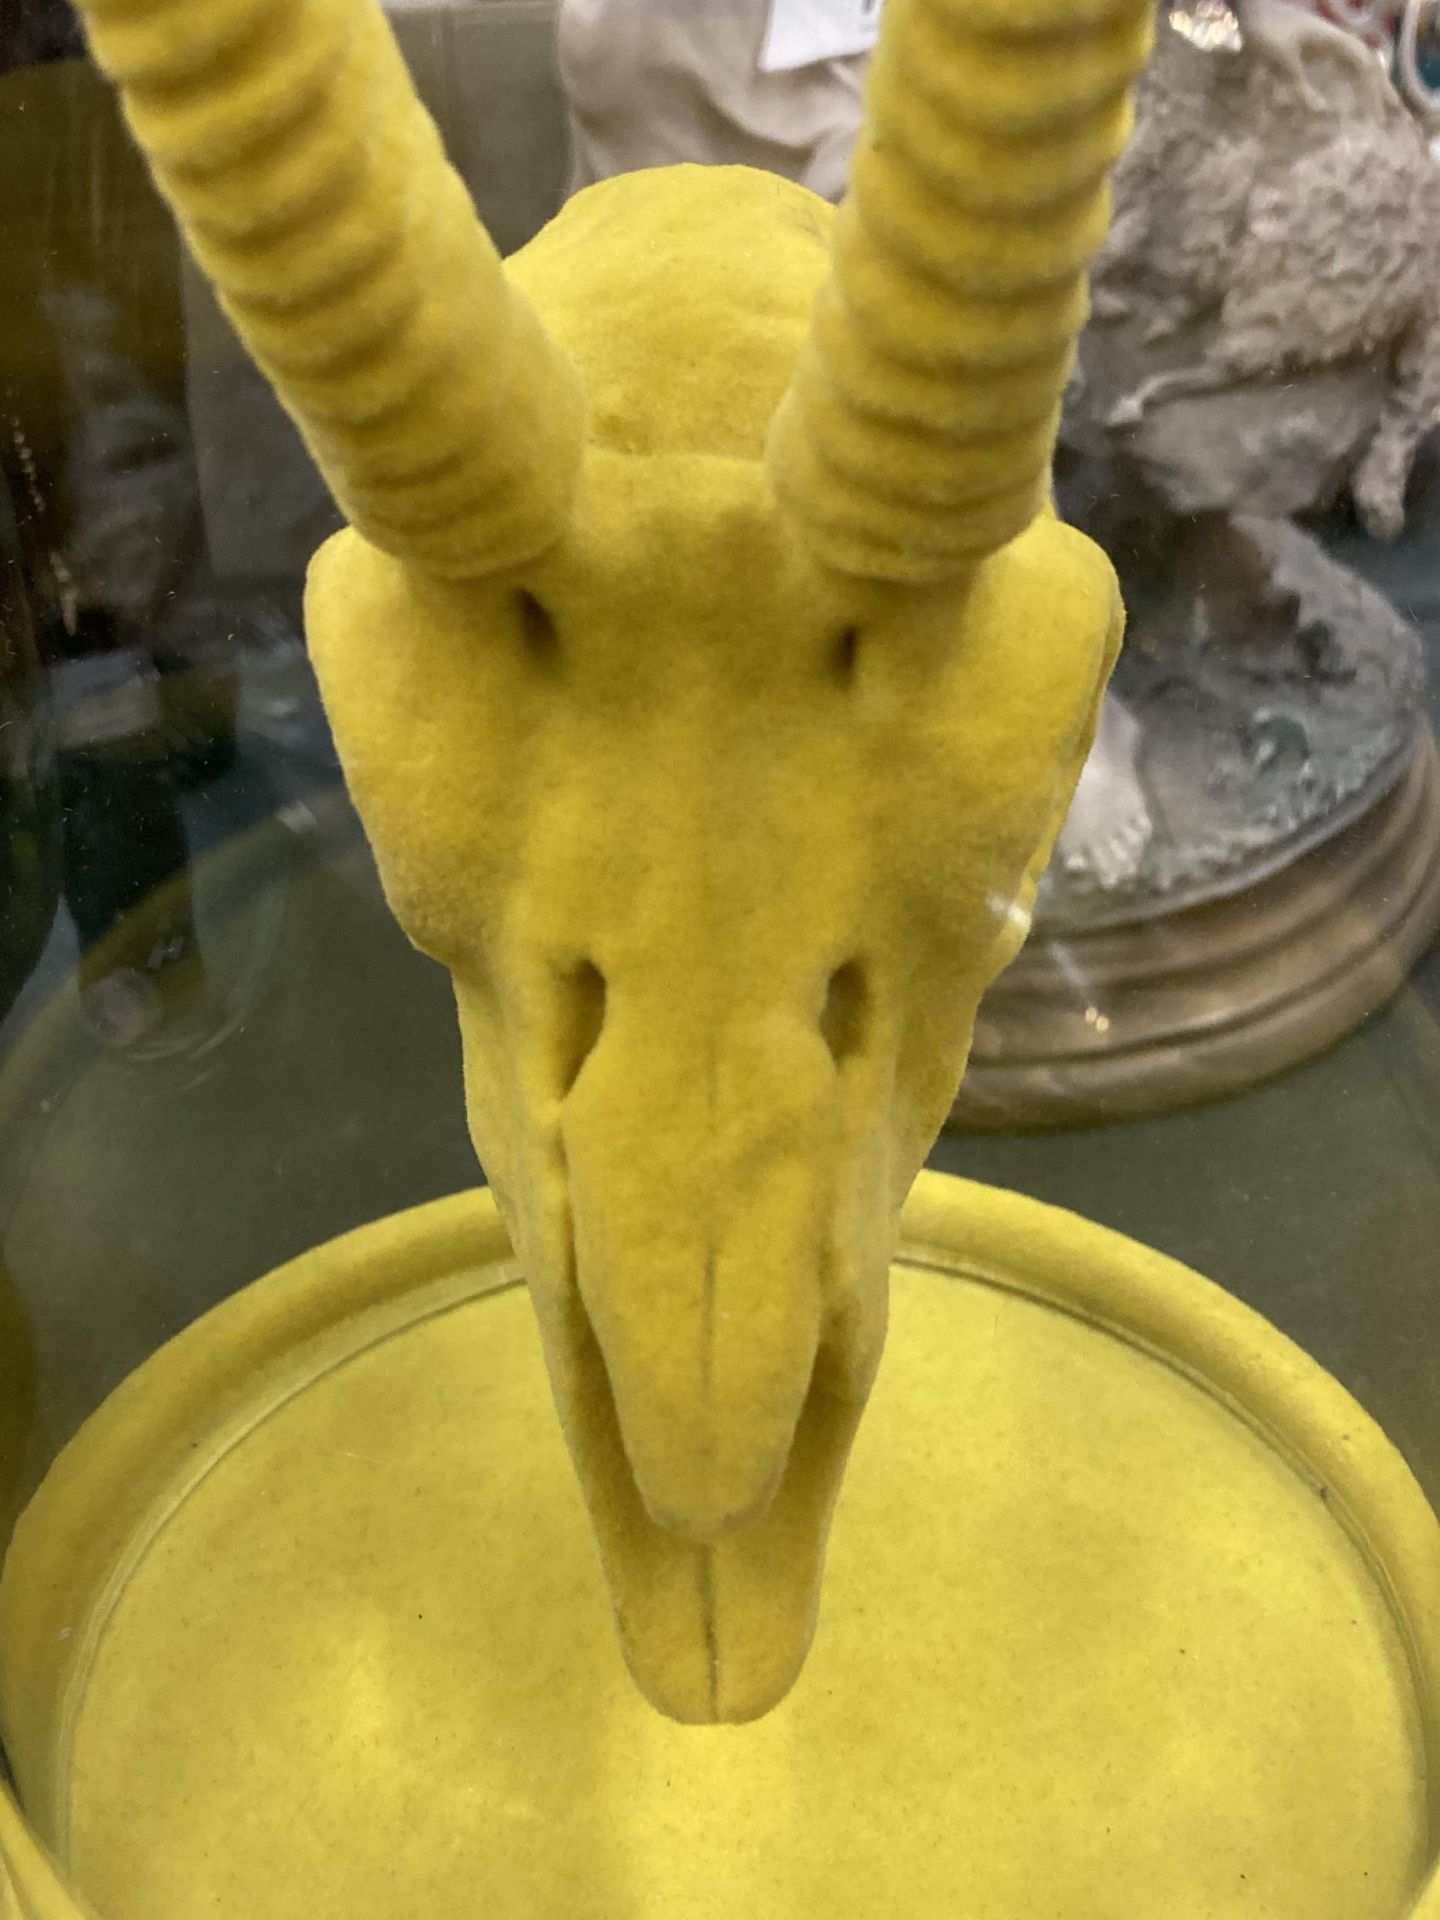 A YELLOW ANIMAL SKULL IN A GLASS DOME - Image 2 of 4